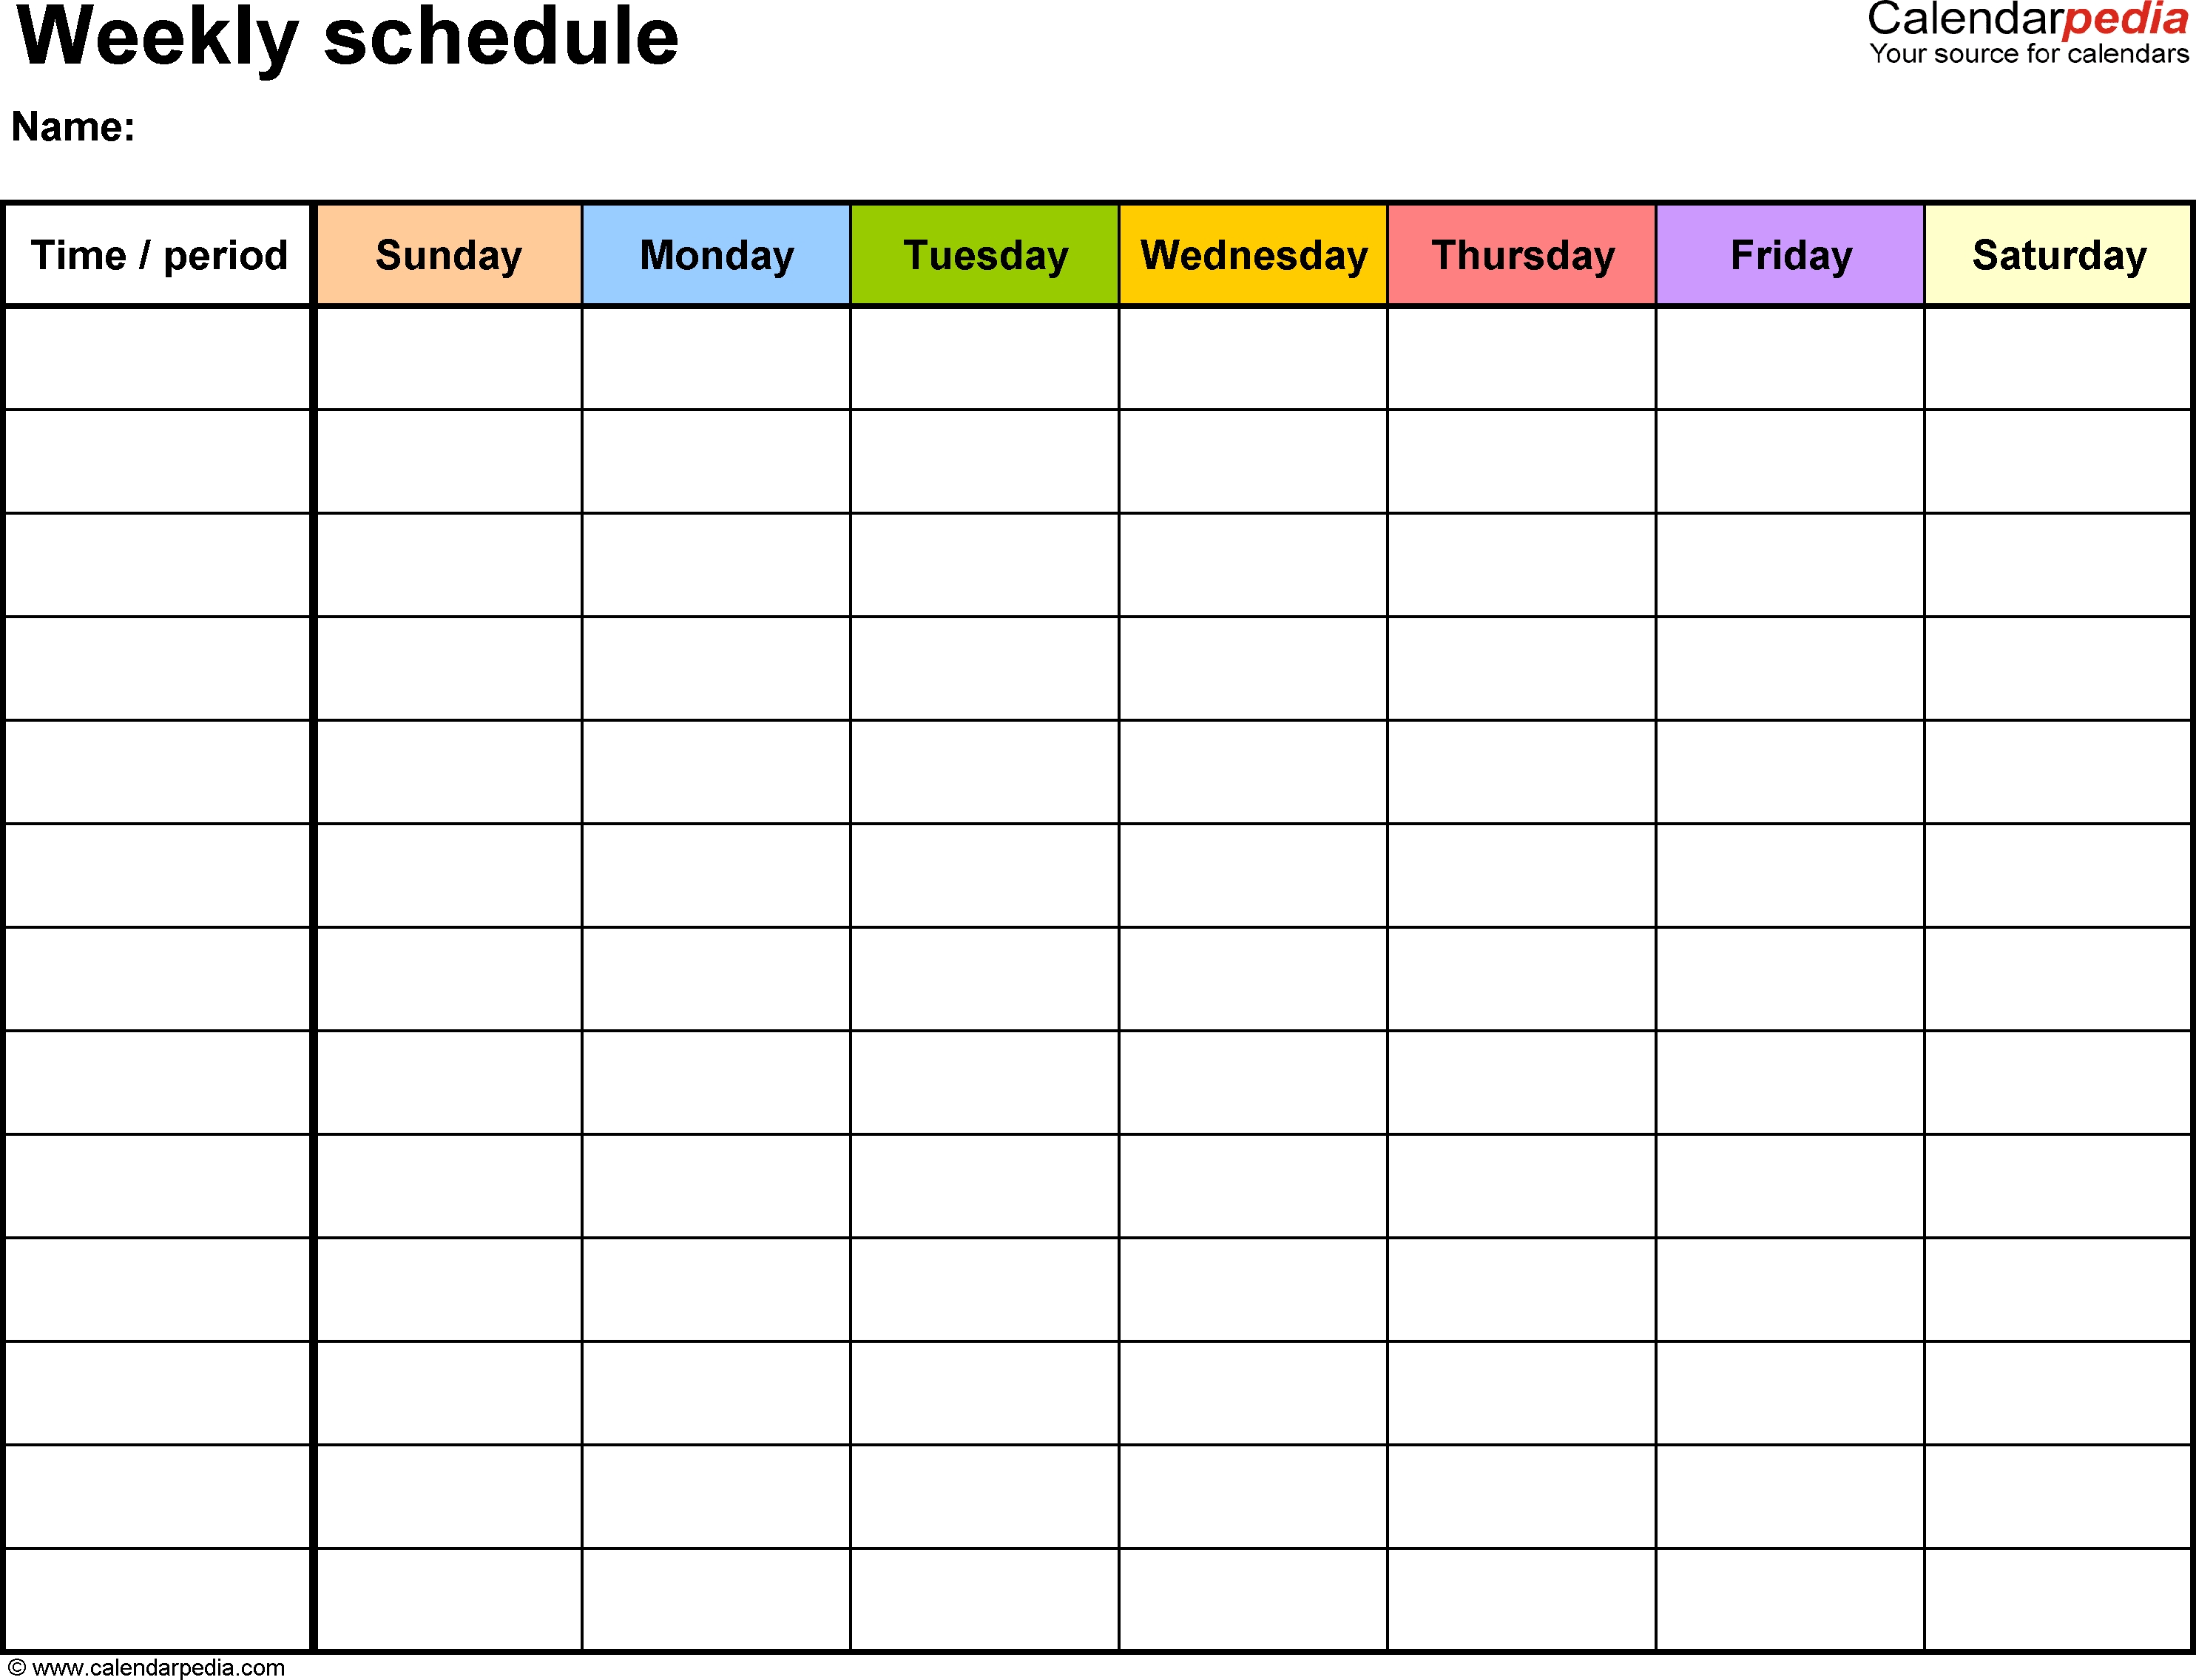 Schedule Template Free Weekly Templates For Excel Daily Agenda Sheet throughout Blank Copy Of Monthly Sign Up Sheet Calendar Schedule